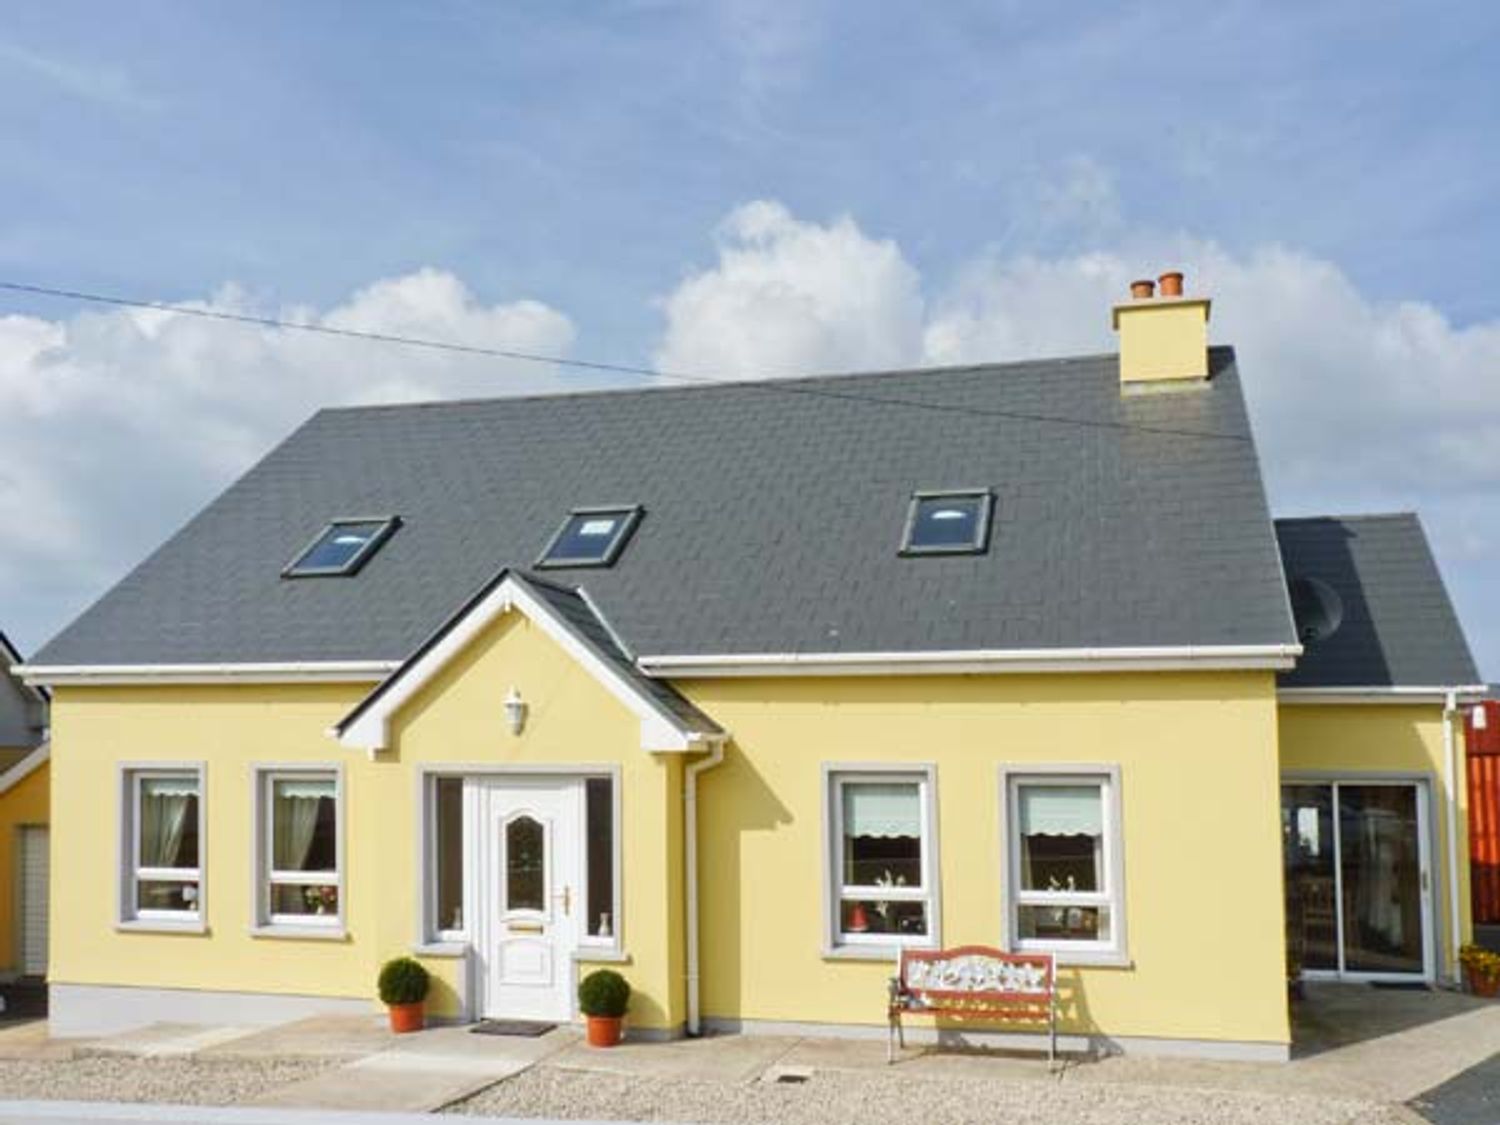 Quay Road Cottage - County Donegal - 915898 - photo 1